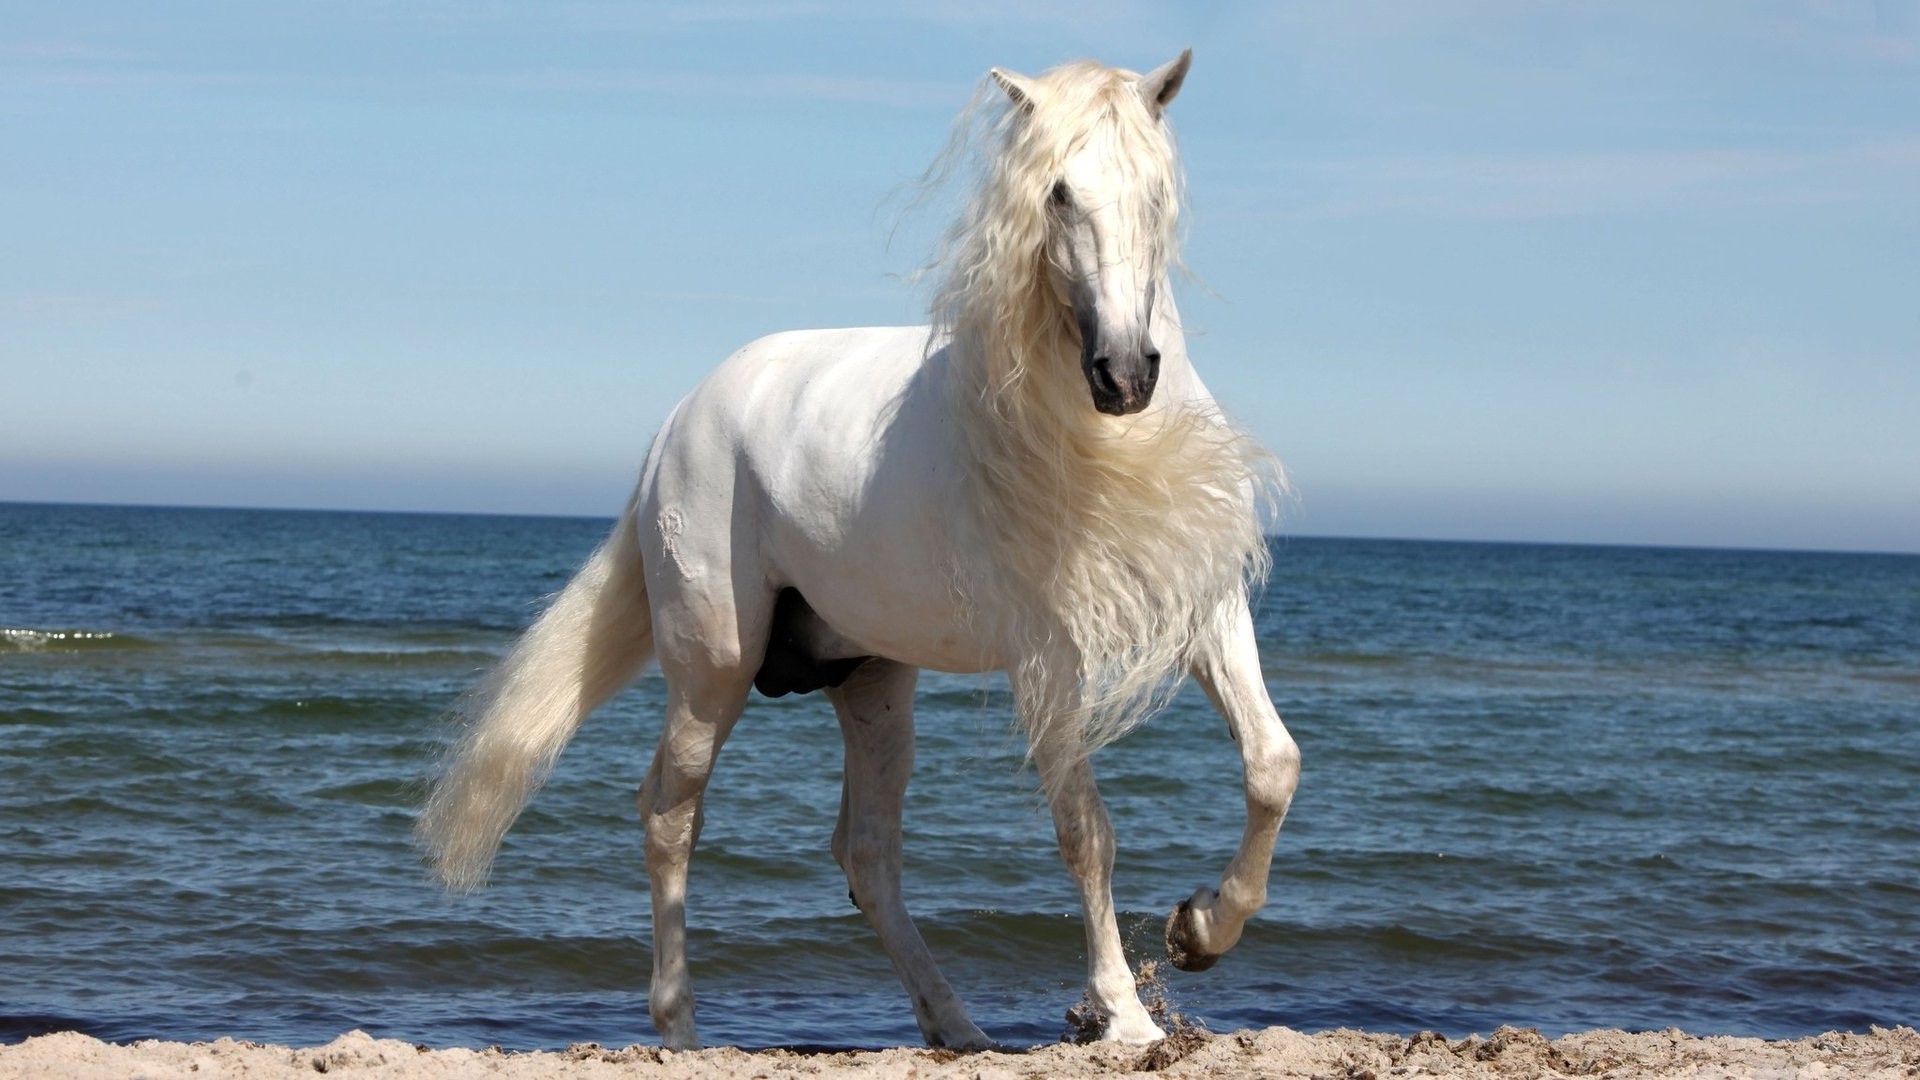 1920x1080, Beautiful White Horse Wallpaper Data Id - White Horse With Long  Hair - 1920x1080 Wallpaper 